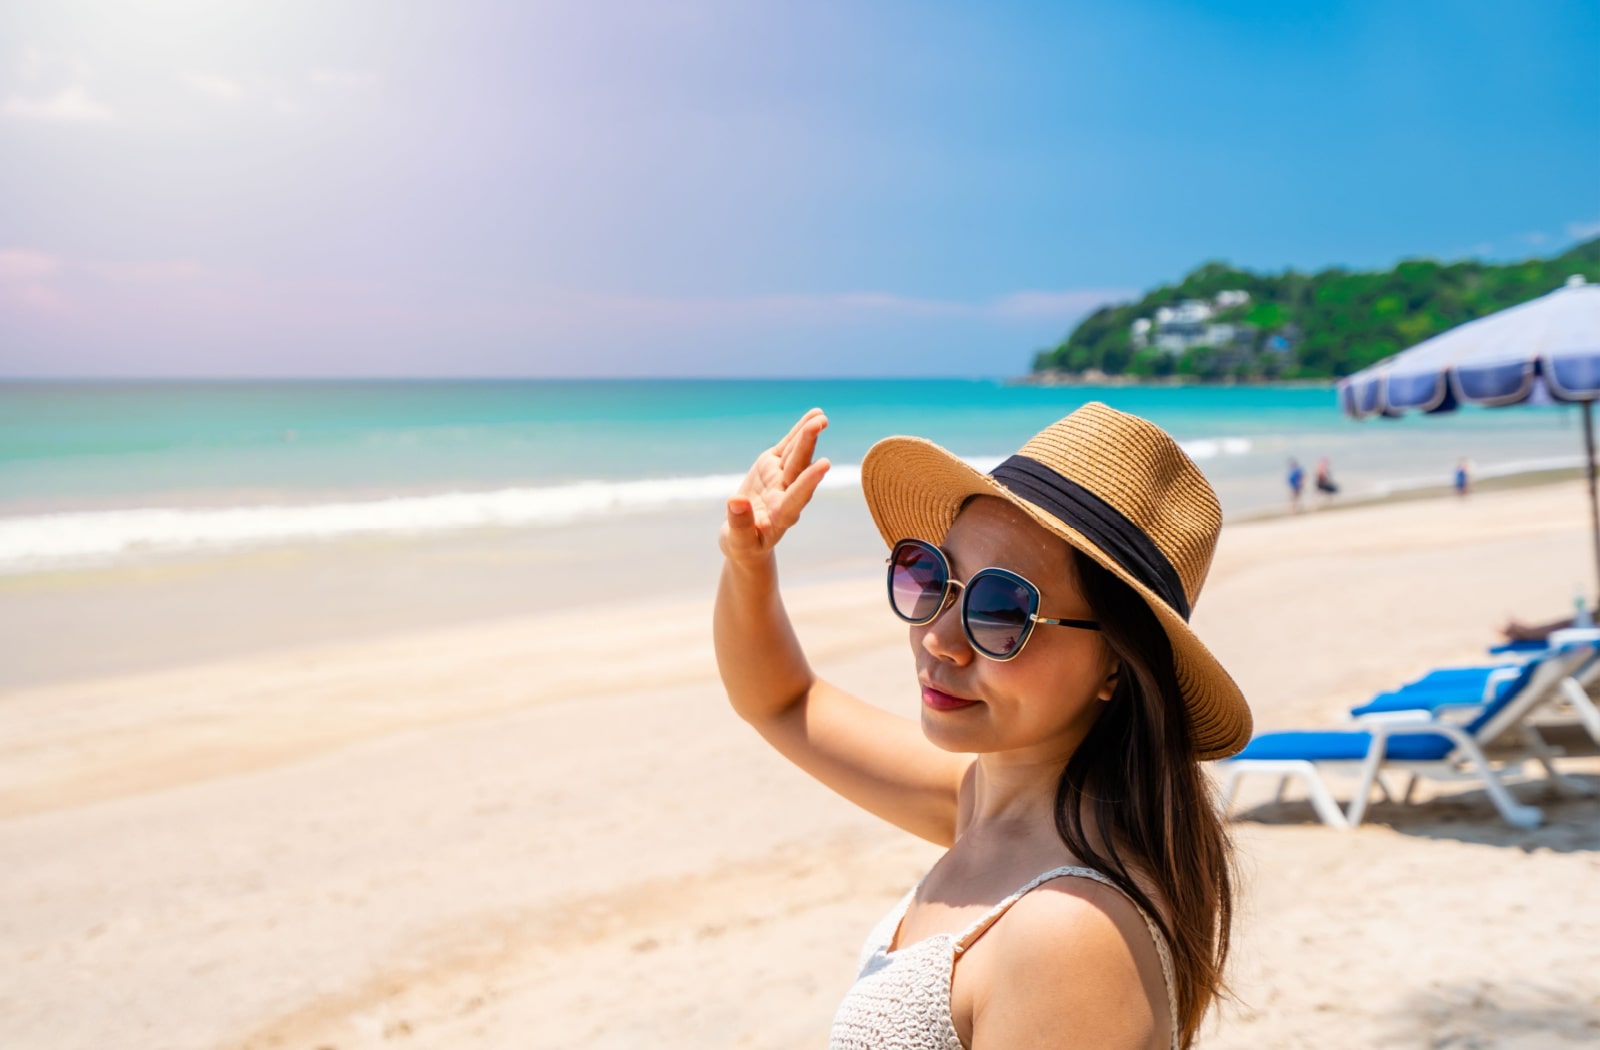 A woman wearing sunglasses, a sun hat, and a bathing suit at the beach, and she's using her hand to block the bright sunlight from her eyes